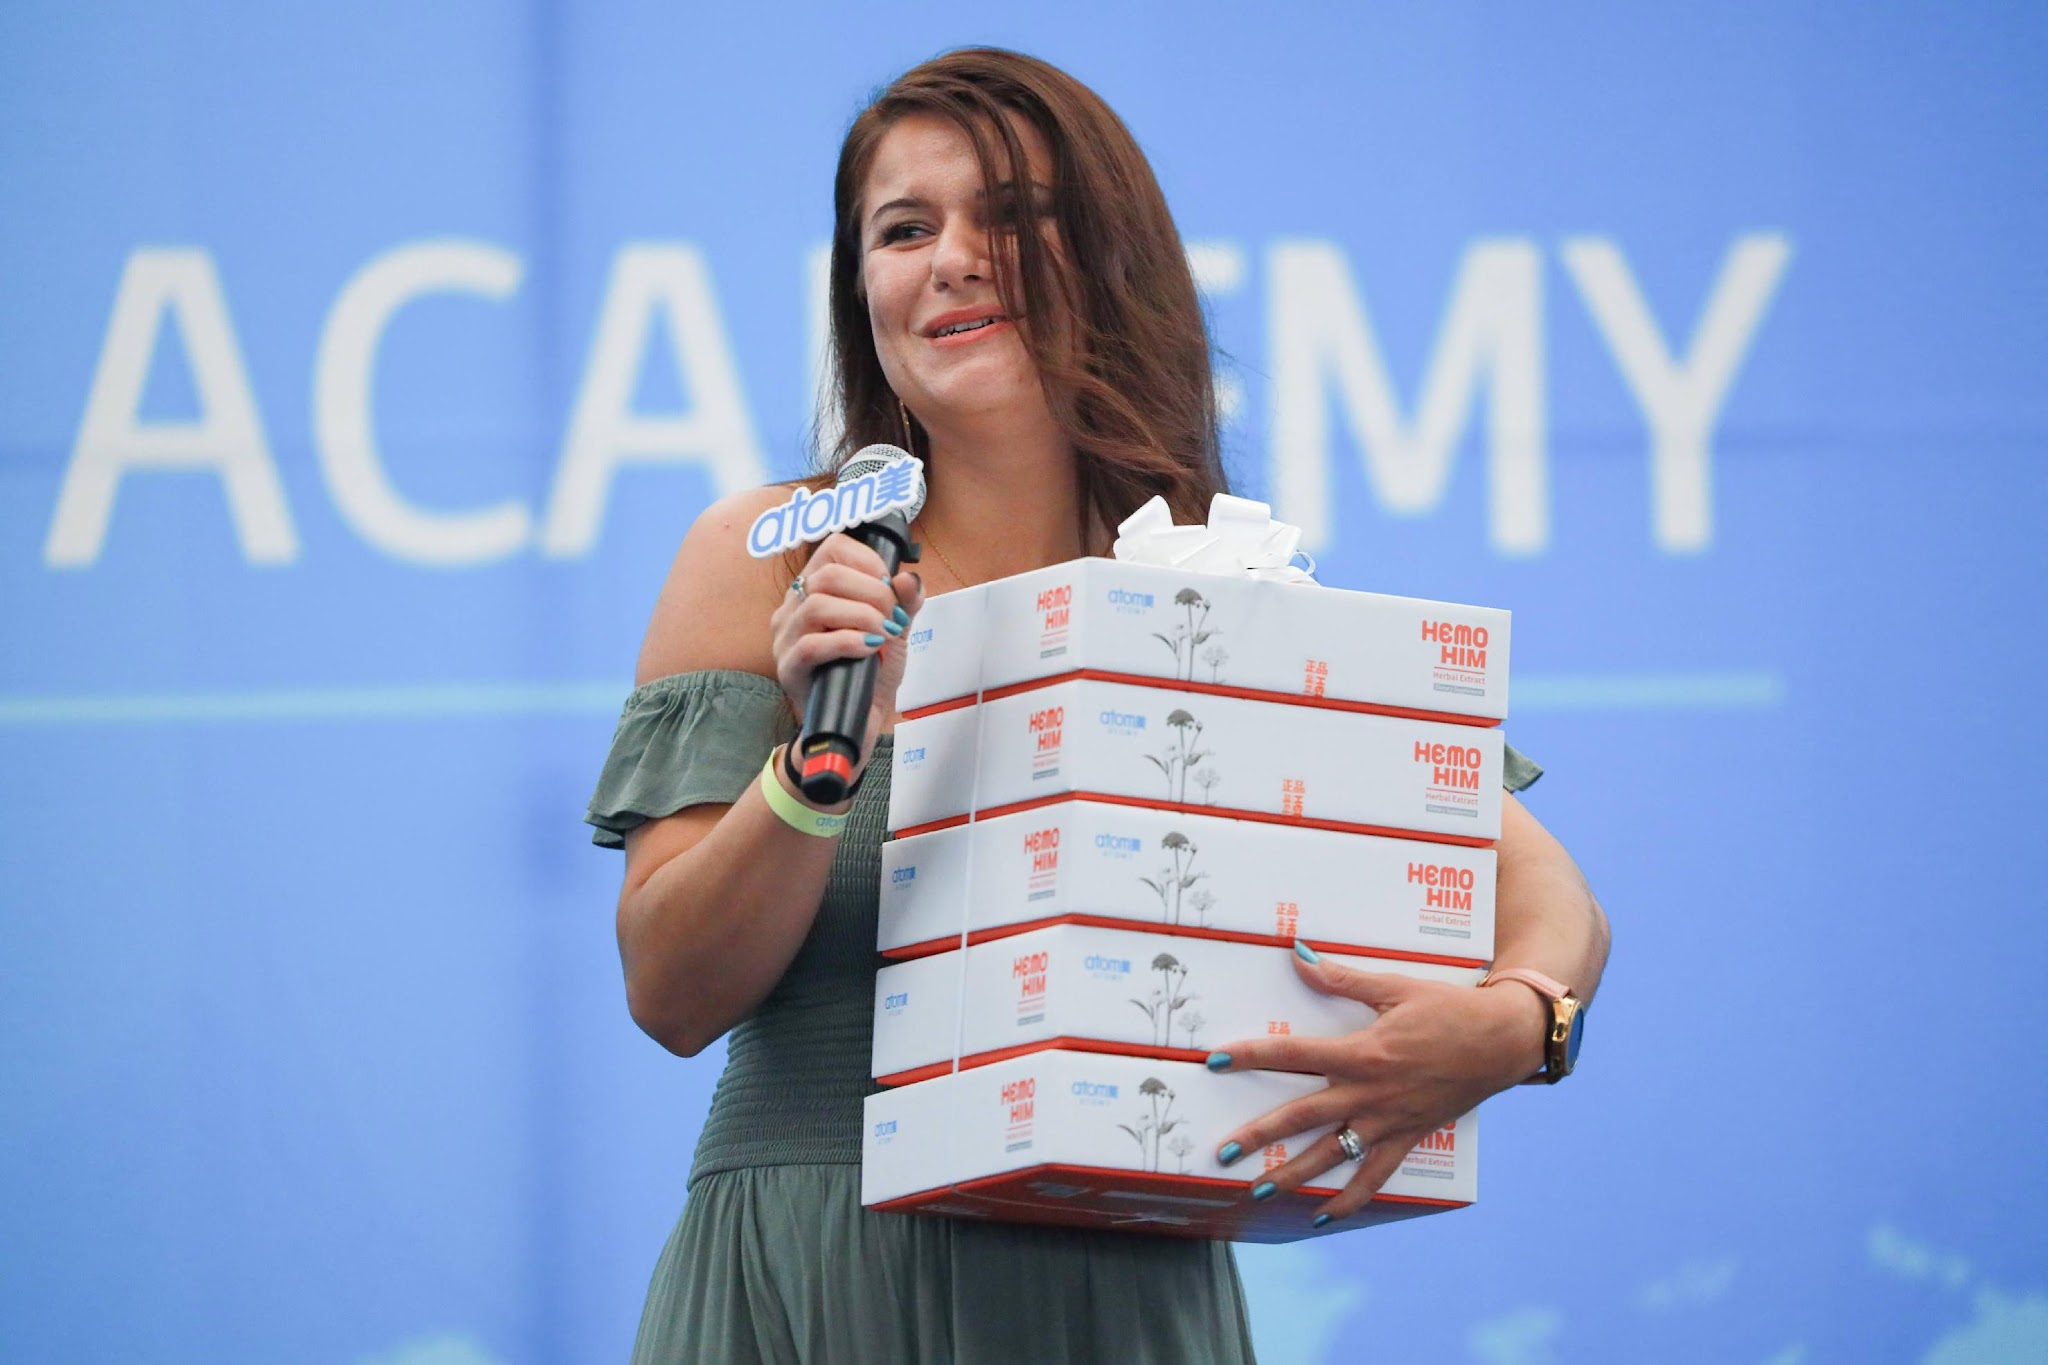 A person holding a microphone and a stack of boxes

Description automatically generated